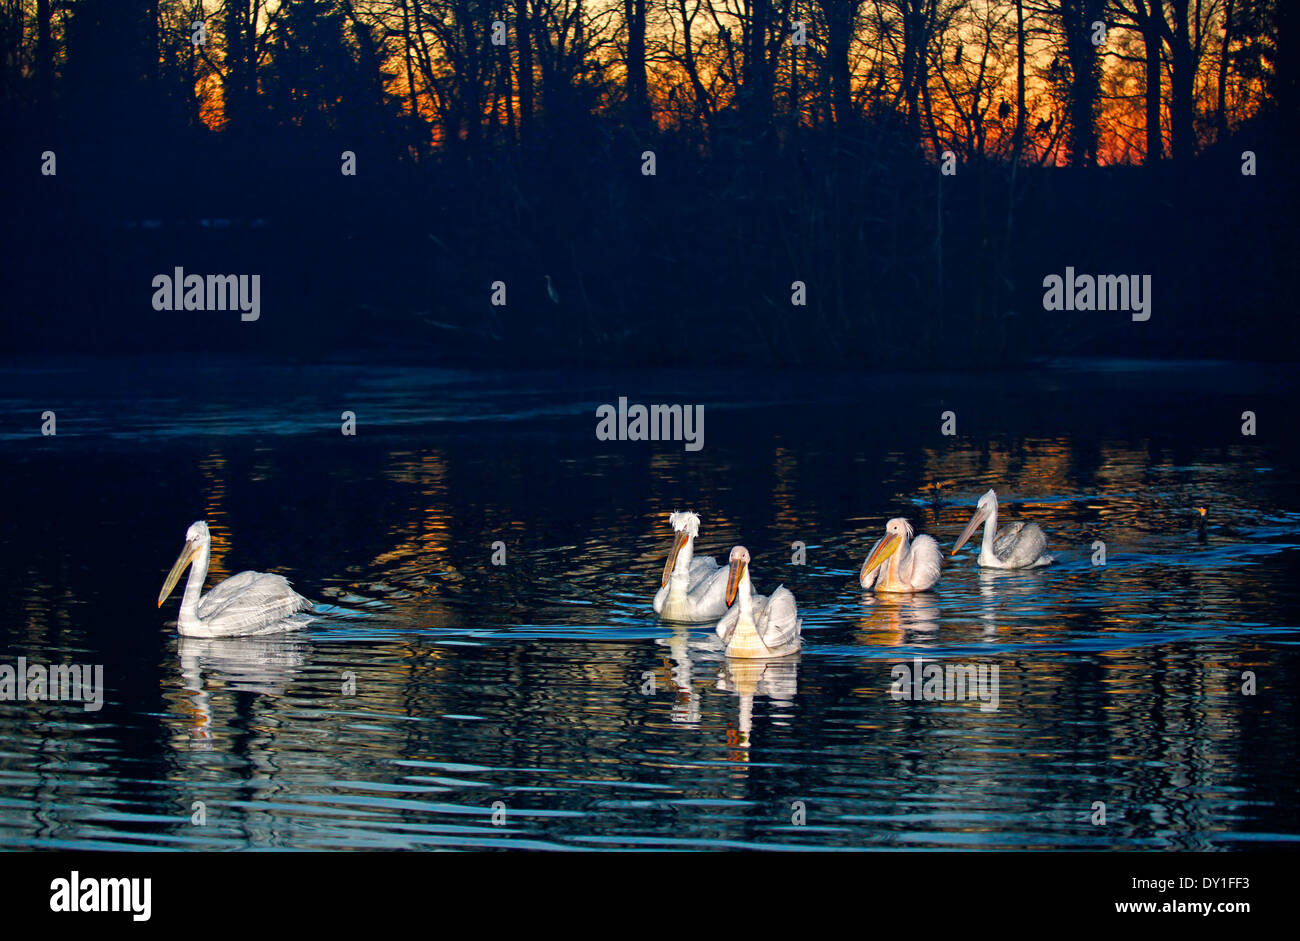 Dalmatian and White pelicans on lake at sunset Stock Photo